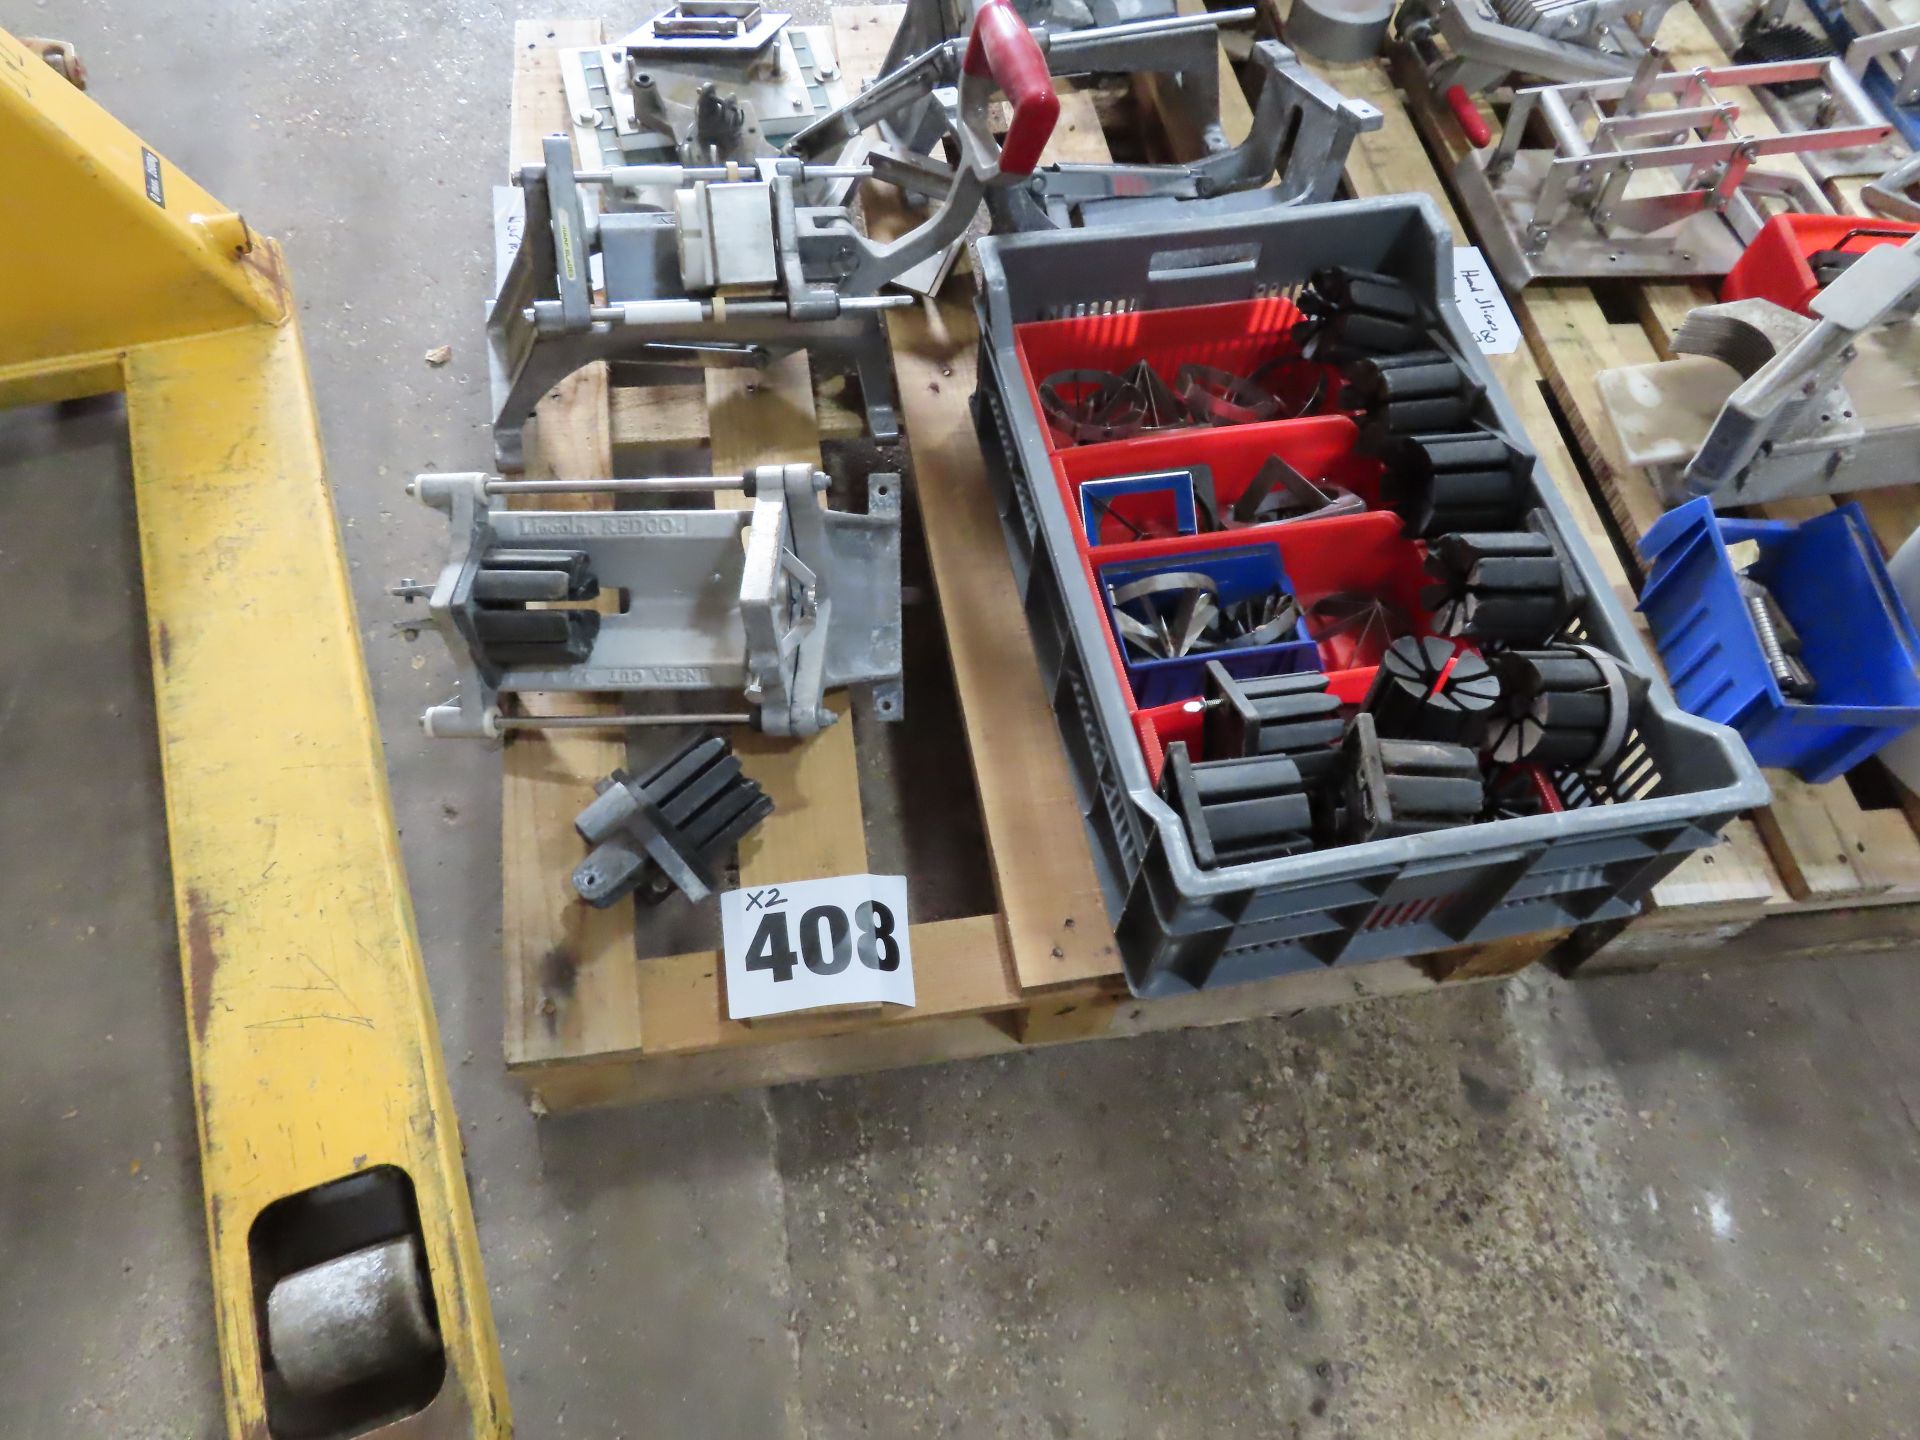 2 X PALLETS OF HAND SLICING/WEDGING MACHINES WITH SPARES.